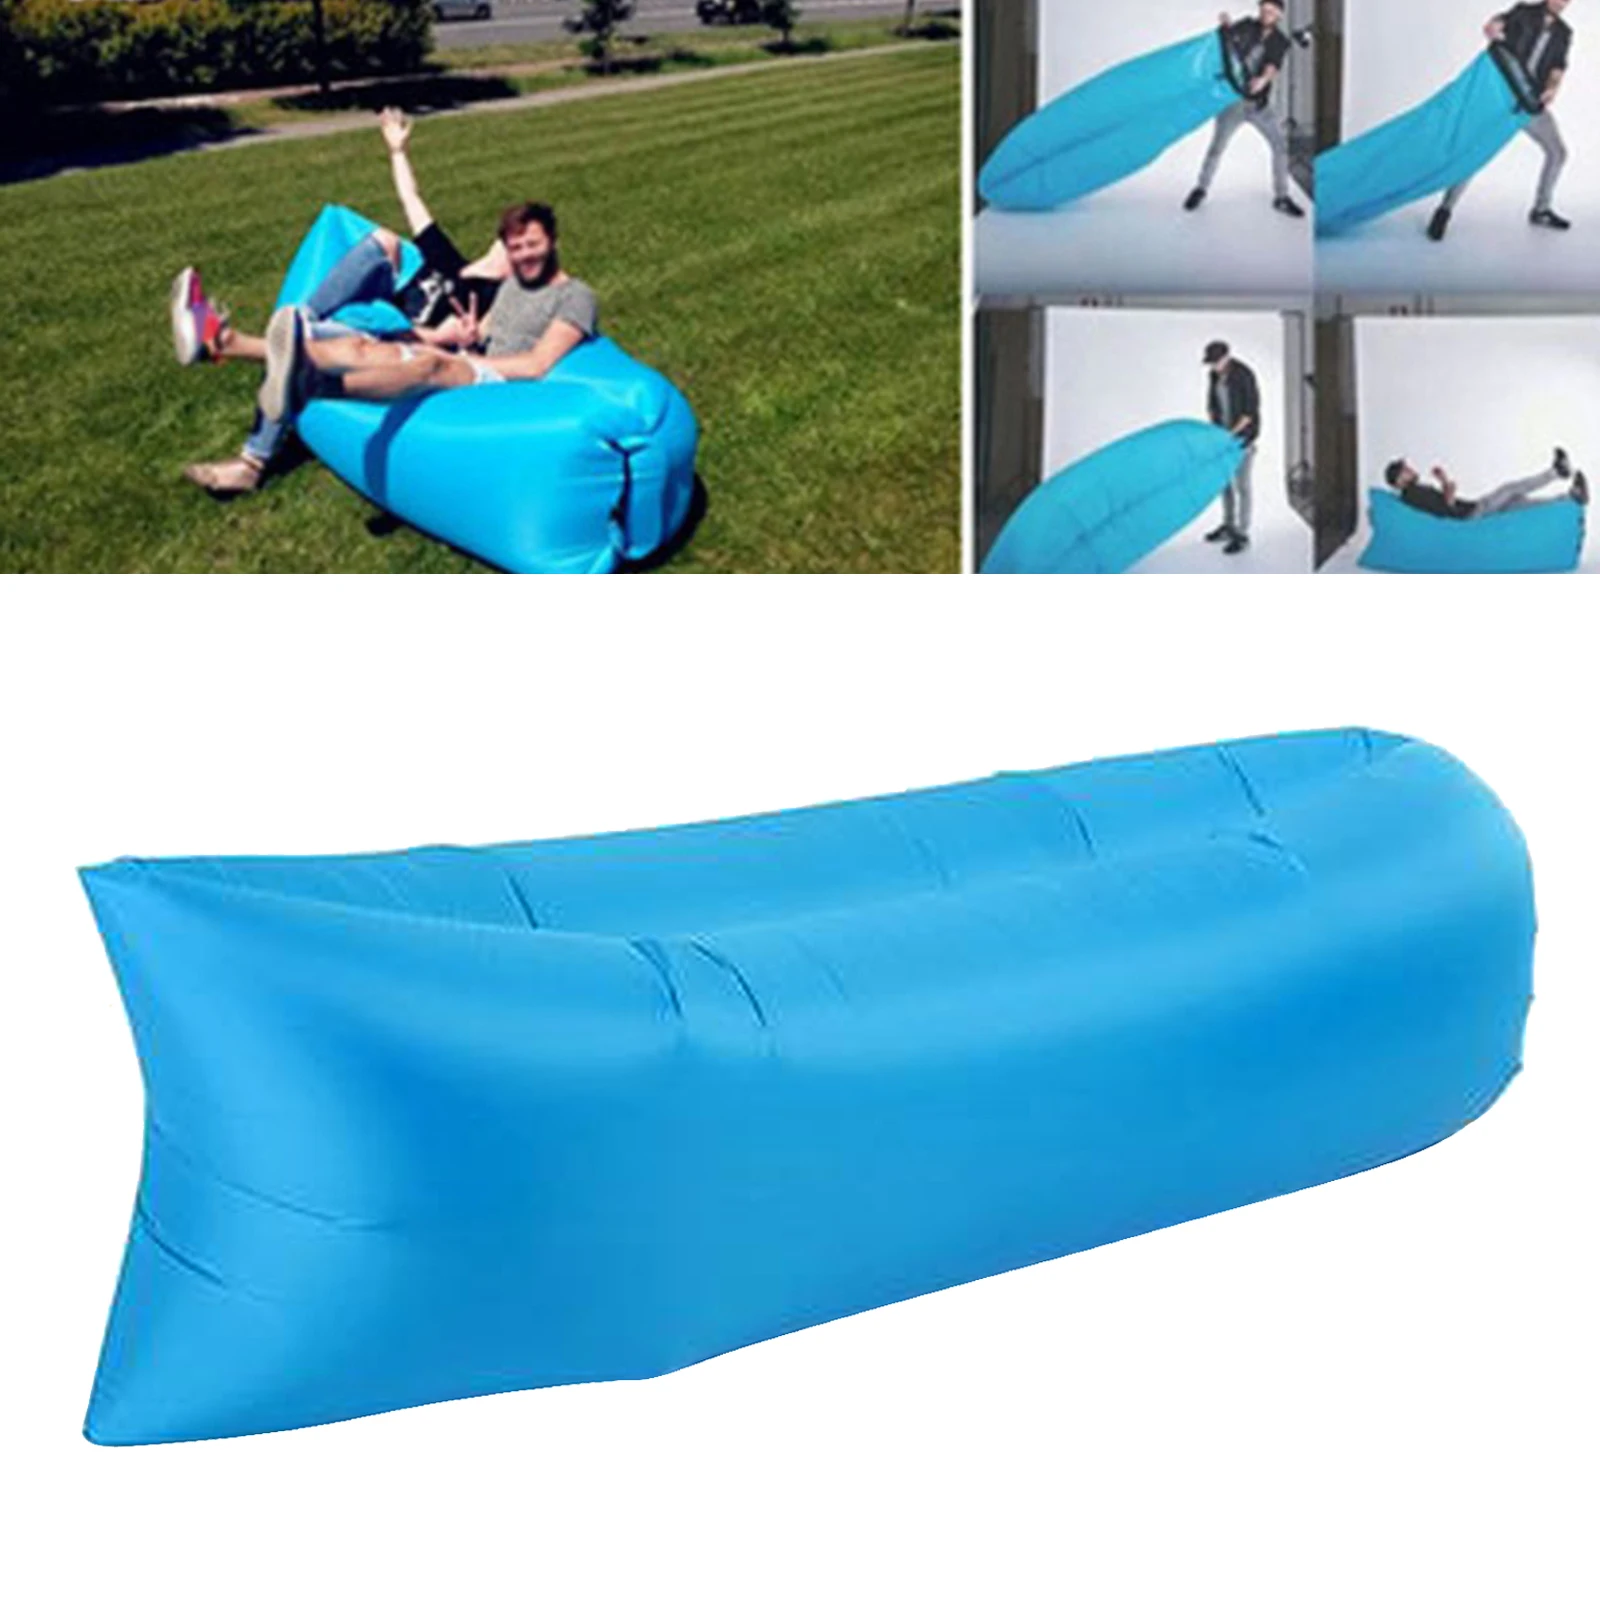 Inflatable Air Bed Sofa Lounger Couch Chair Bag Hangout Sleeping Bag Inflatable Mattress Beach Pool Camping Picnic Hammock